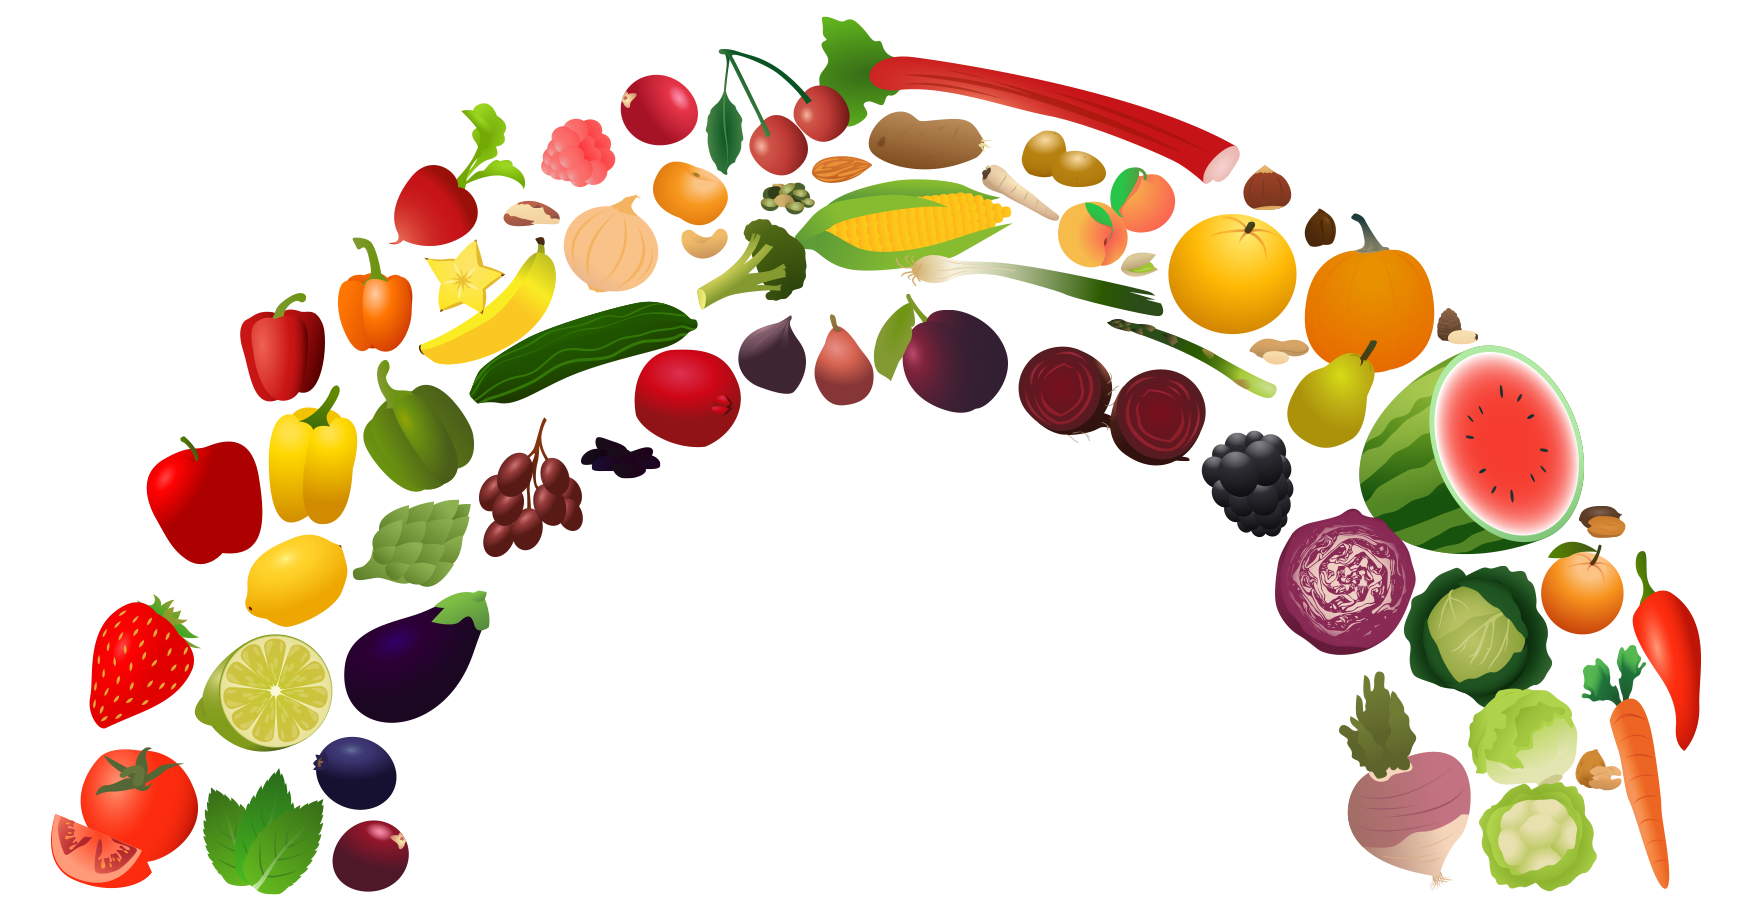 Weight clipart healthy patient. View rainbow png free